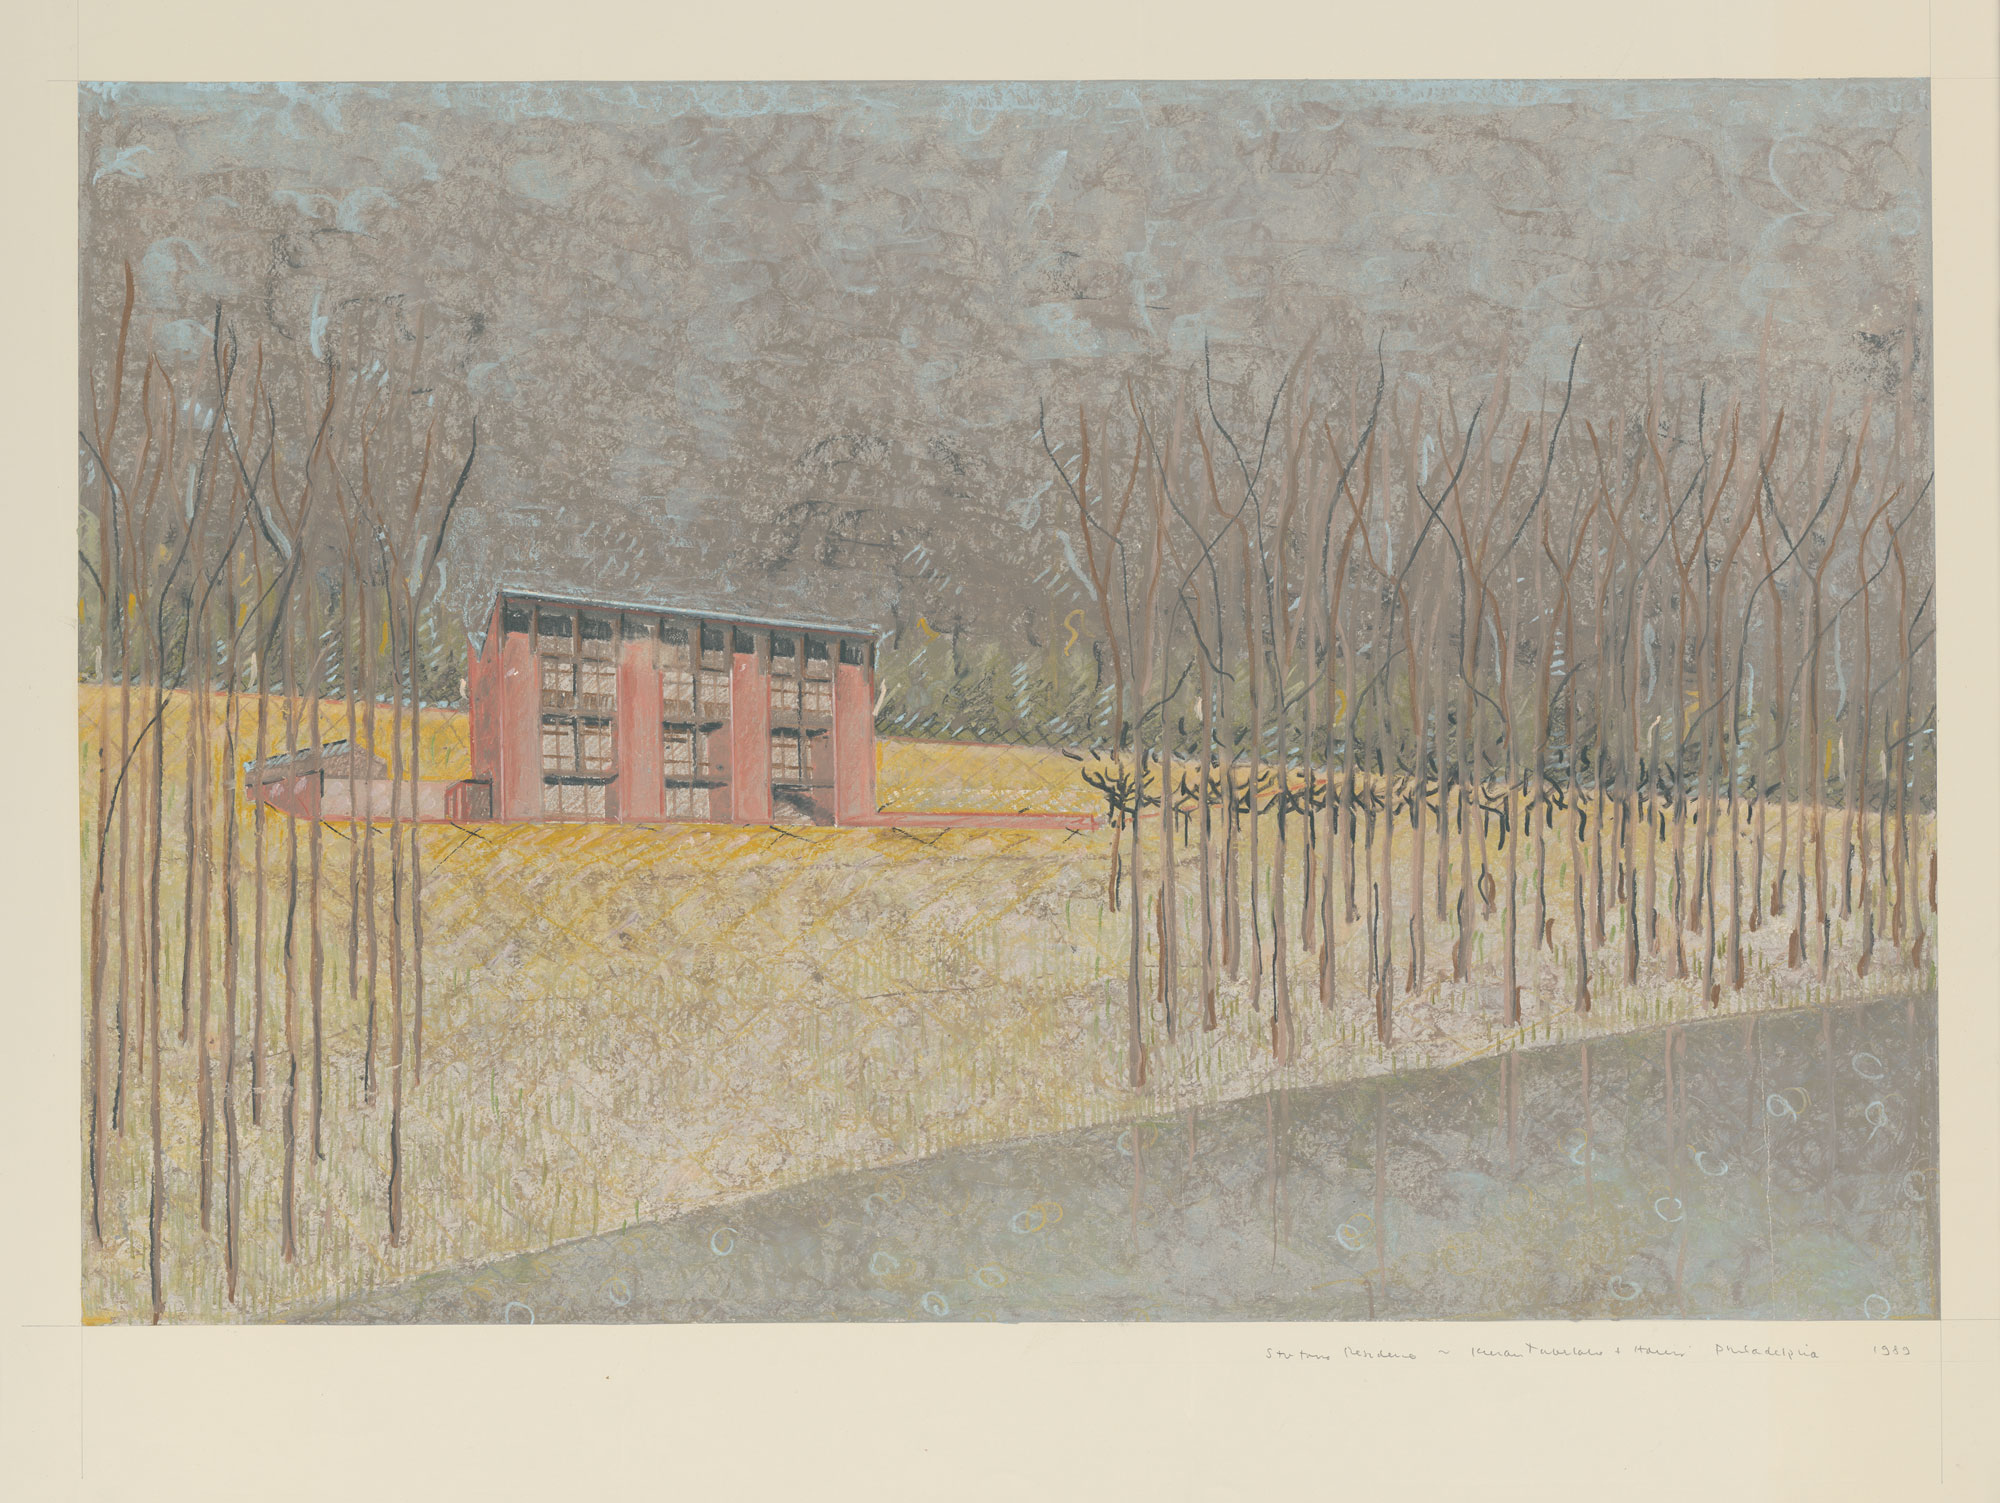 Pastel sketch of Stufano residence